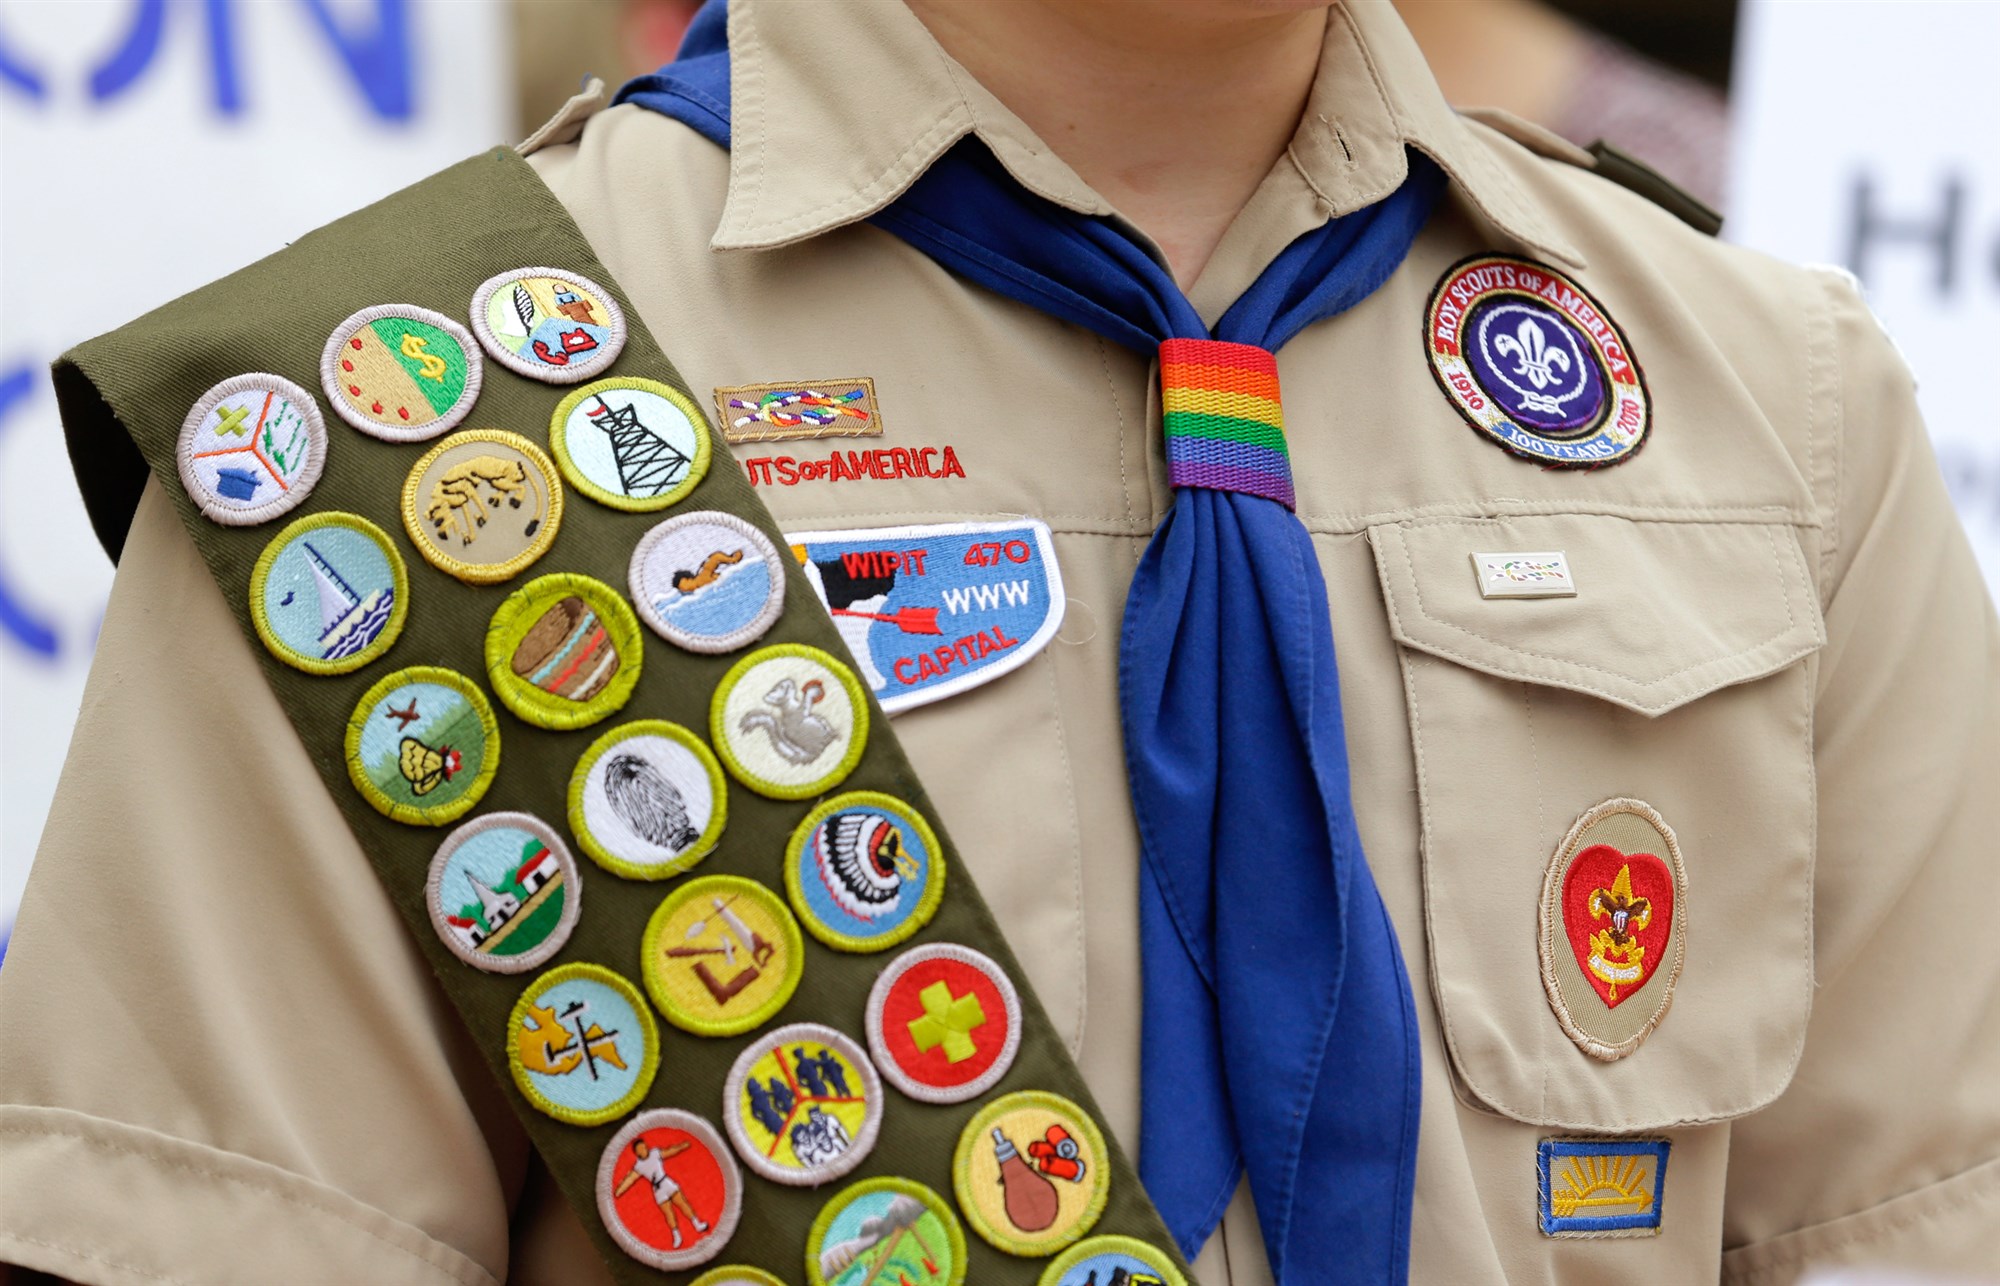 CPC Welcomes First Openly Gay CEO in the Boy Scouts of America’s 112-Year History